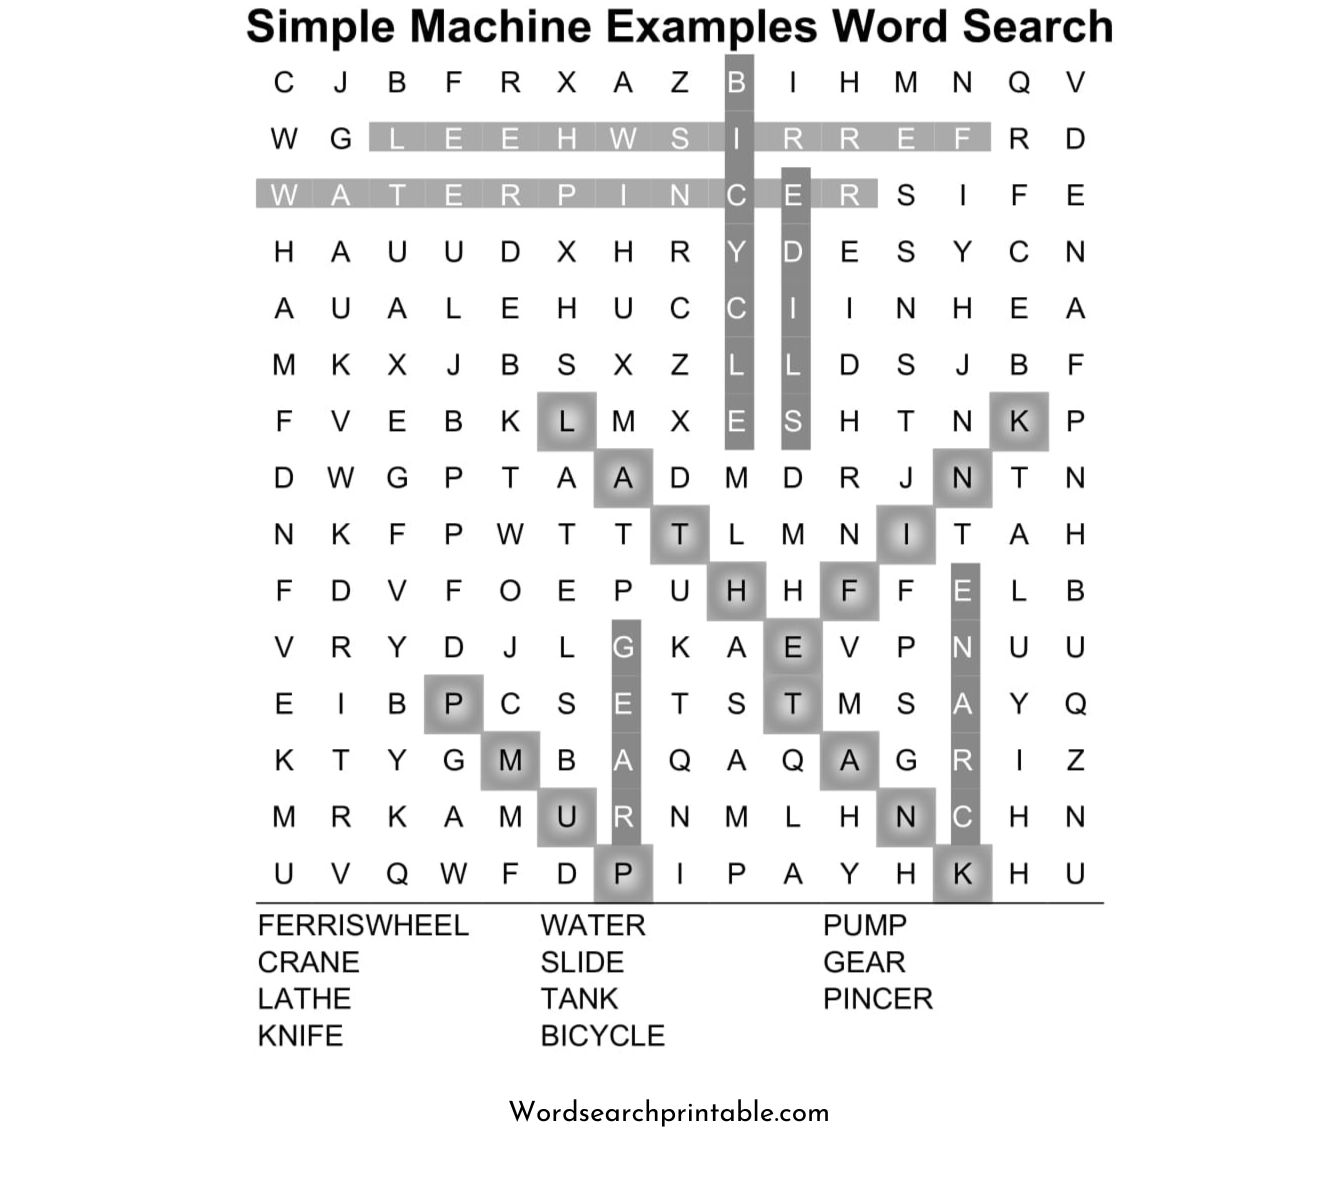 simple machine examples word search puzzle solution